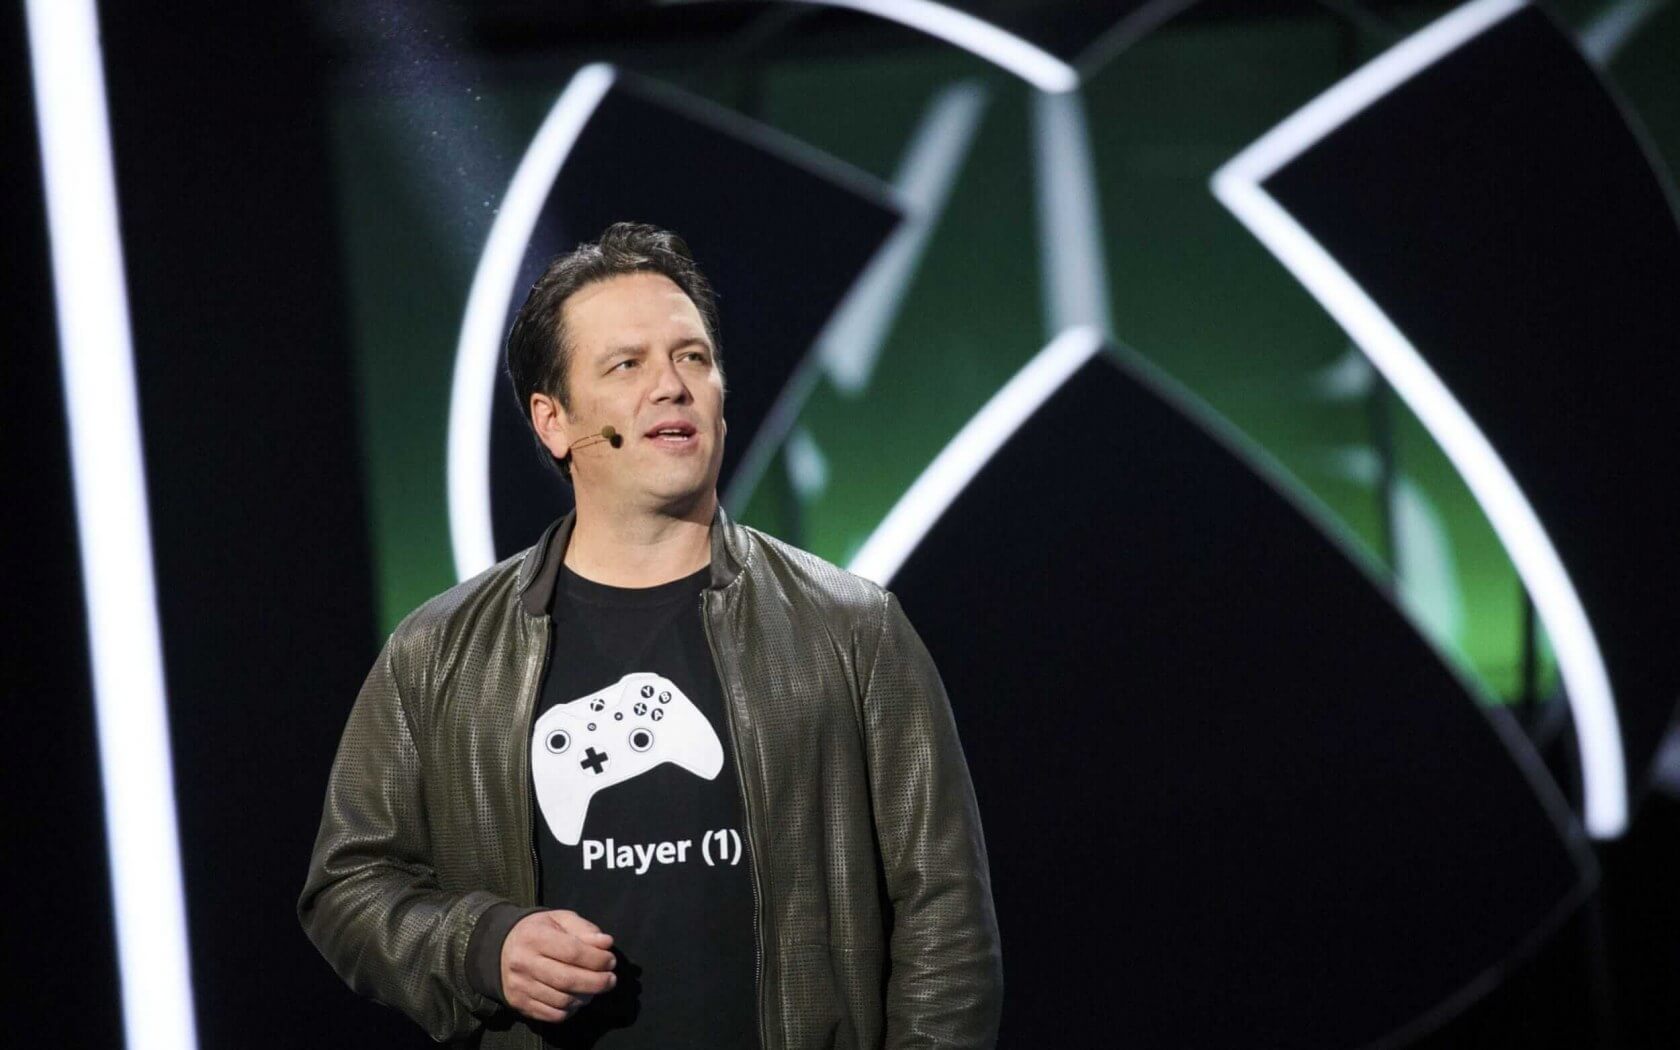 Xbox boss confirms next-gen console is out in the wild